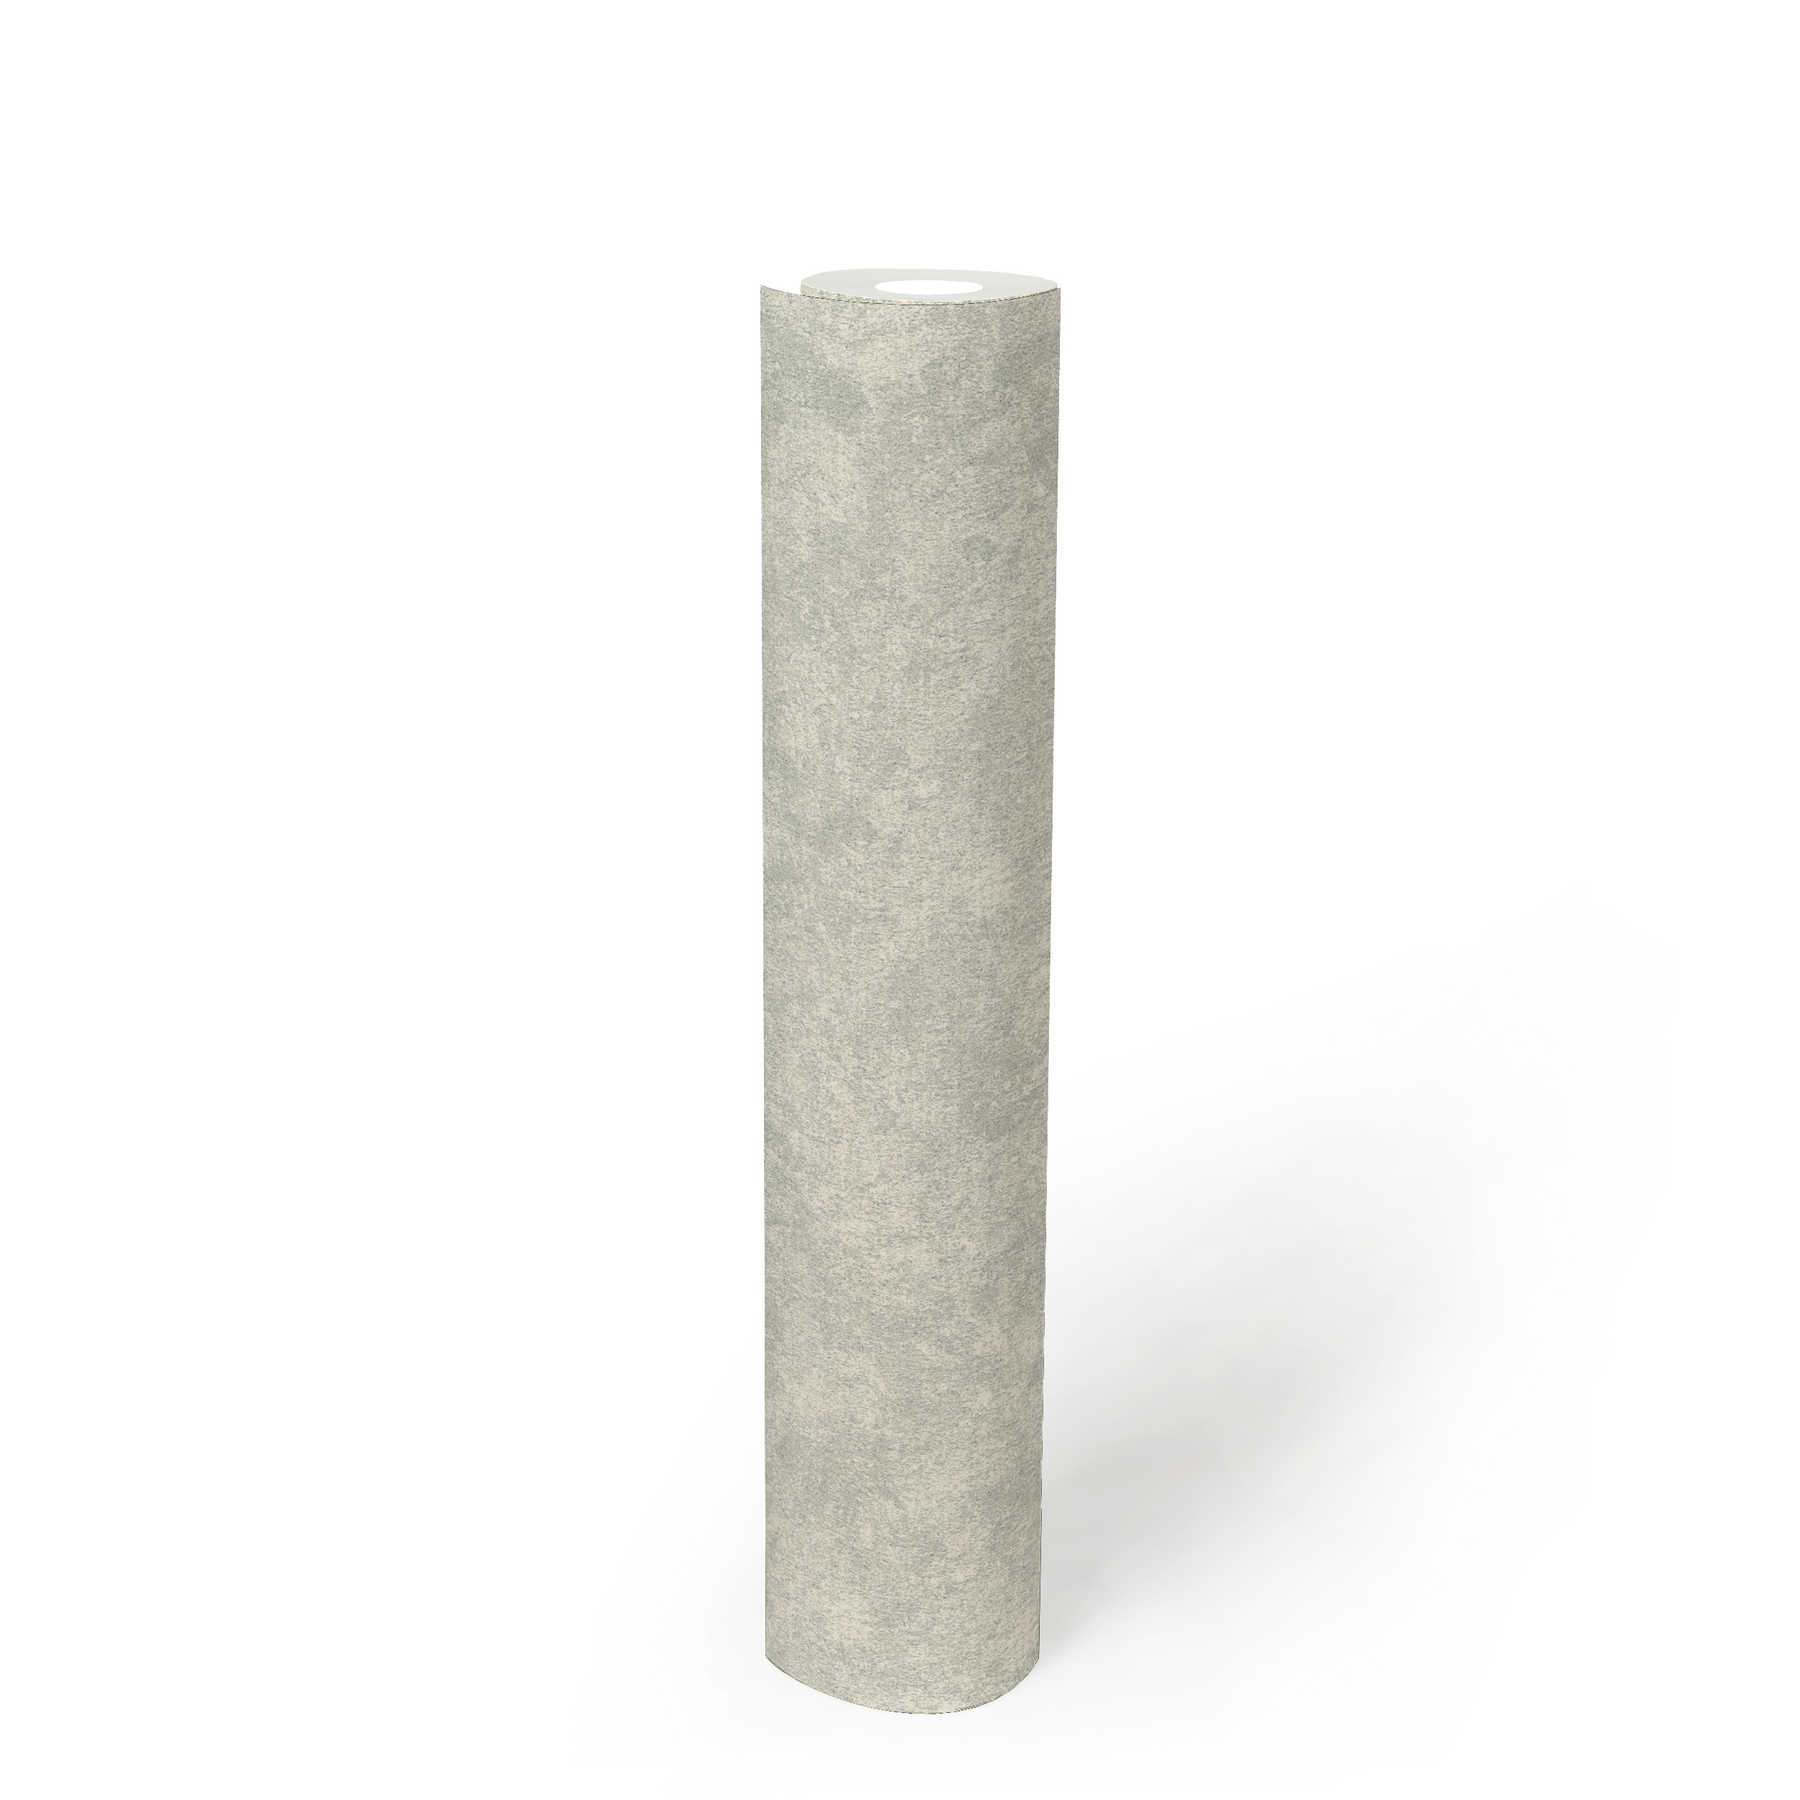             Plain wallpaper with mottled structure look - grey
        